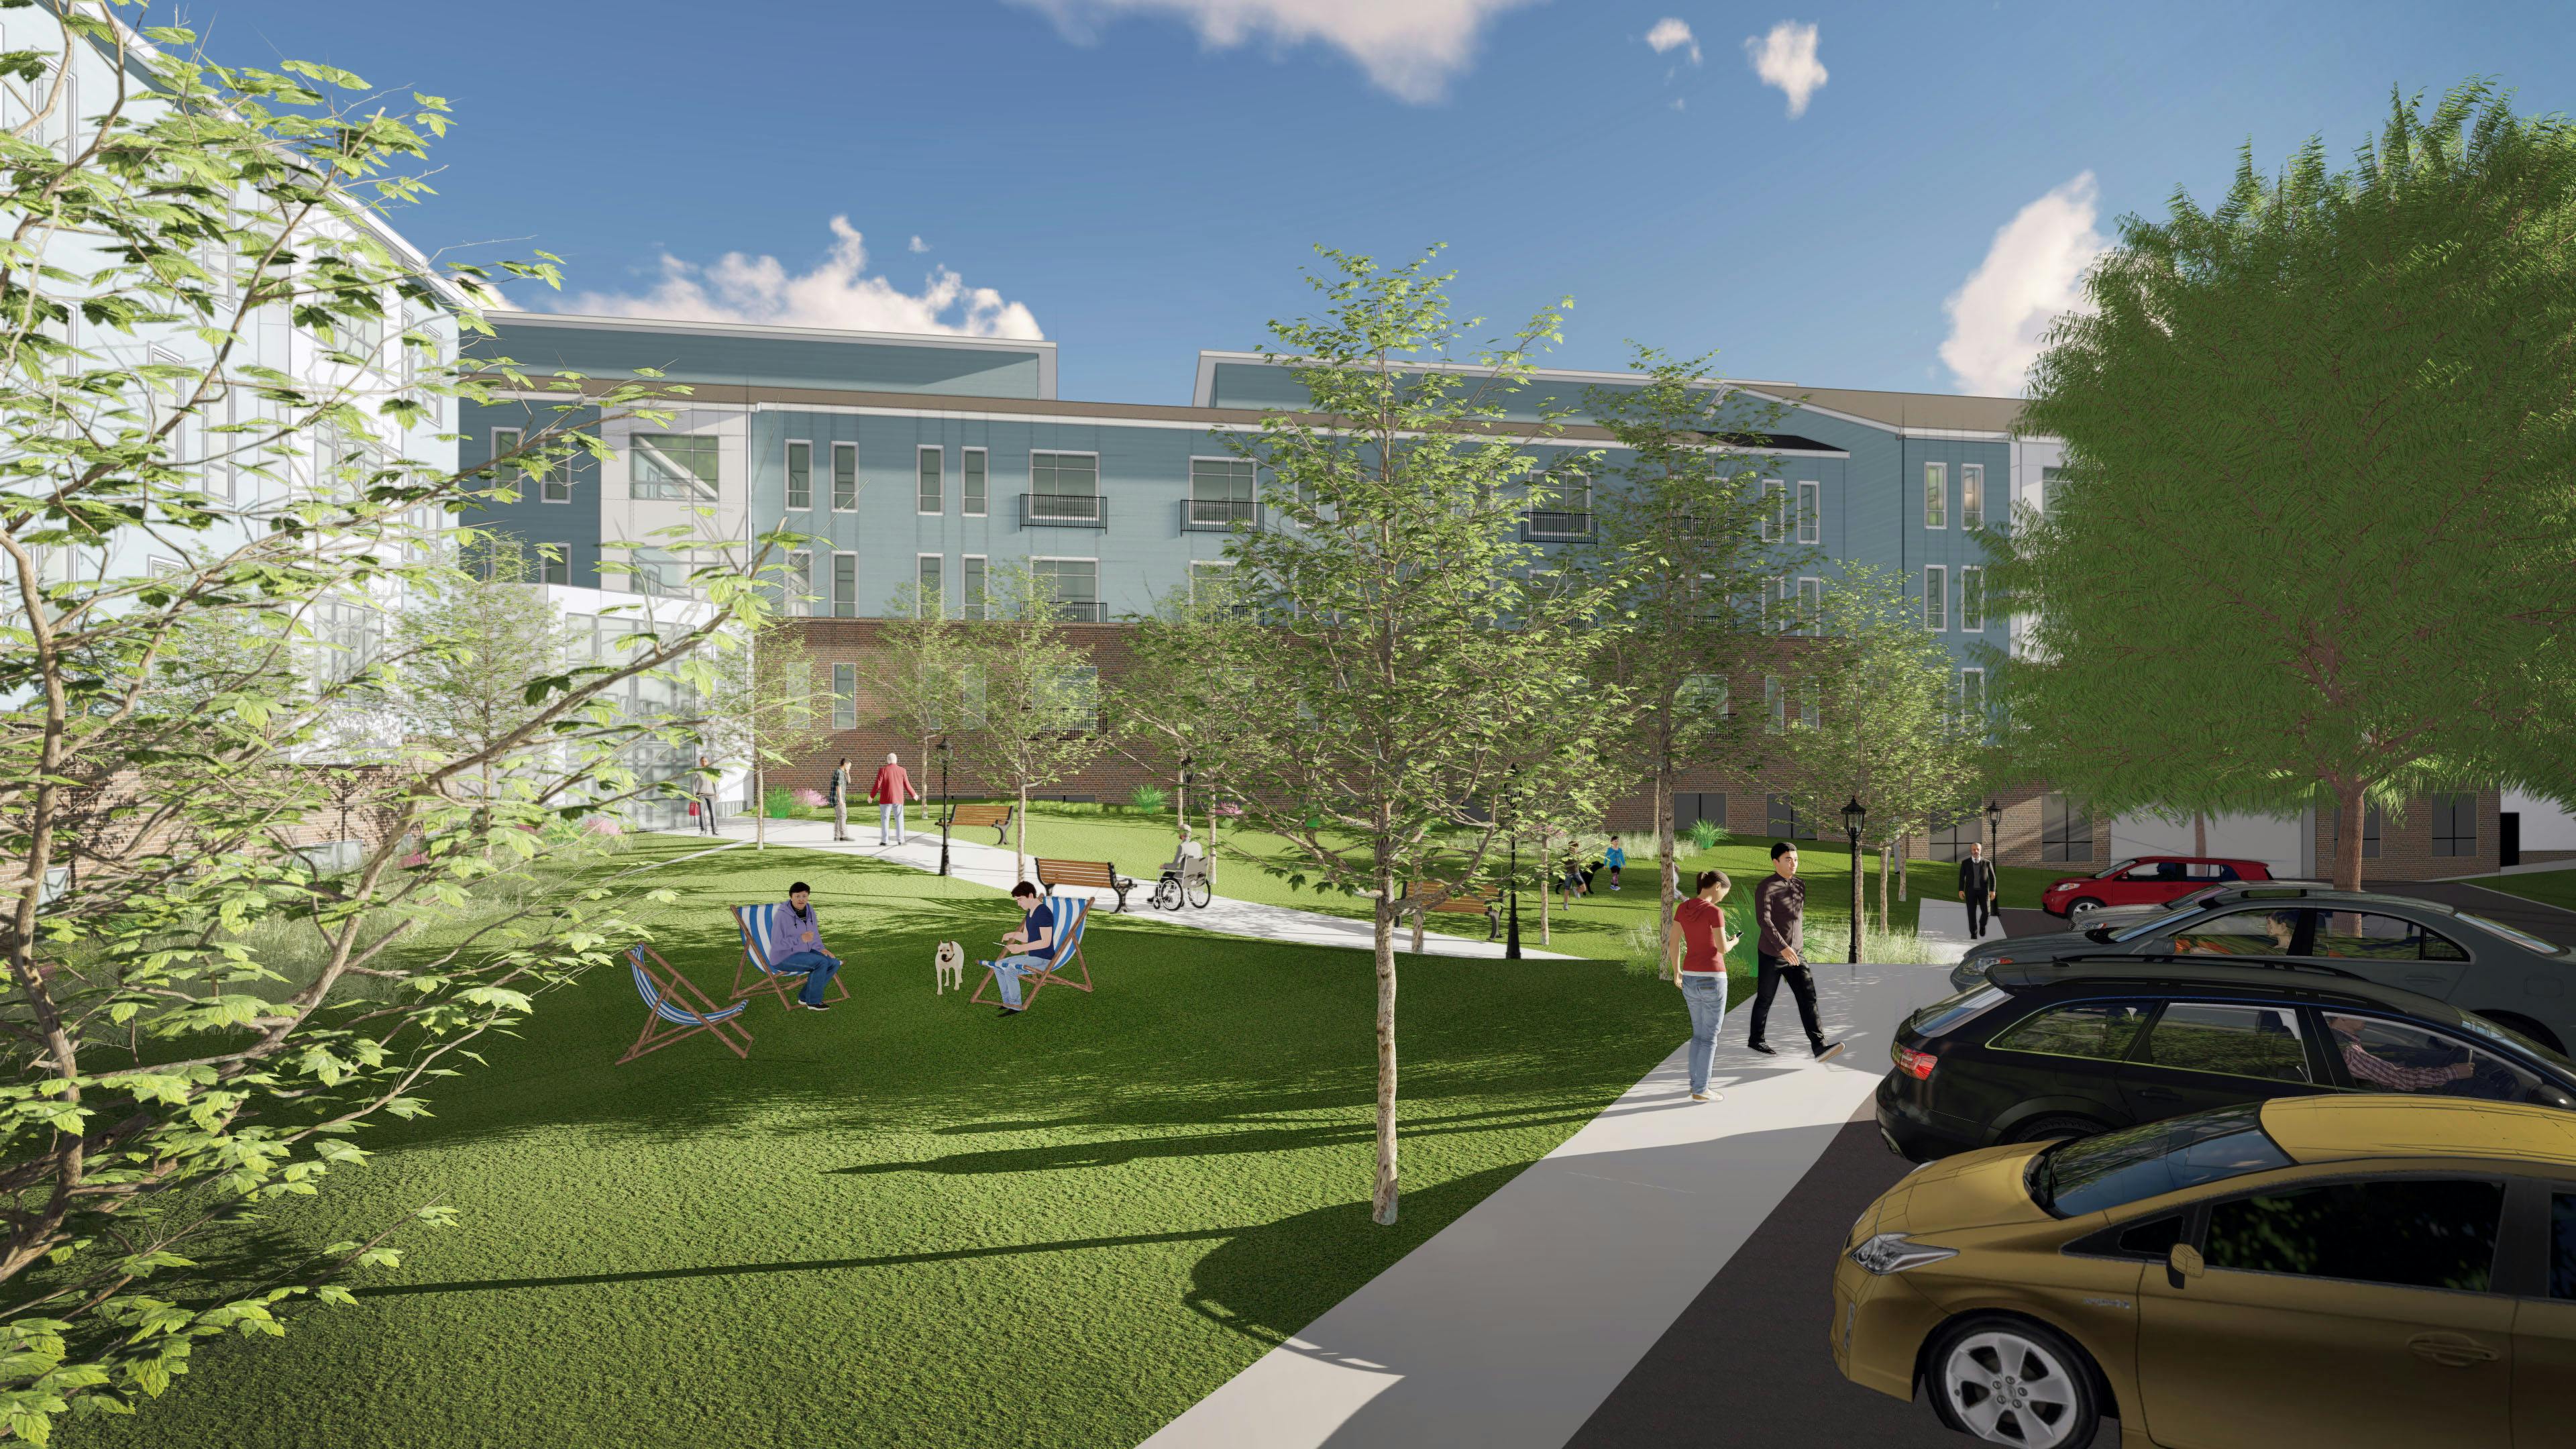 Patuxent Commons render with people relaxing in a park area near building